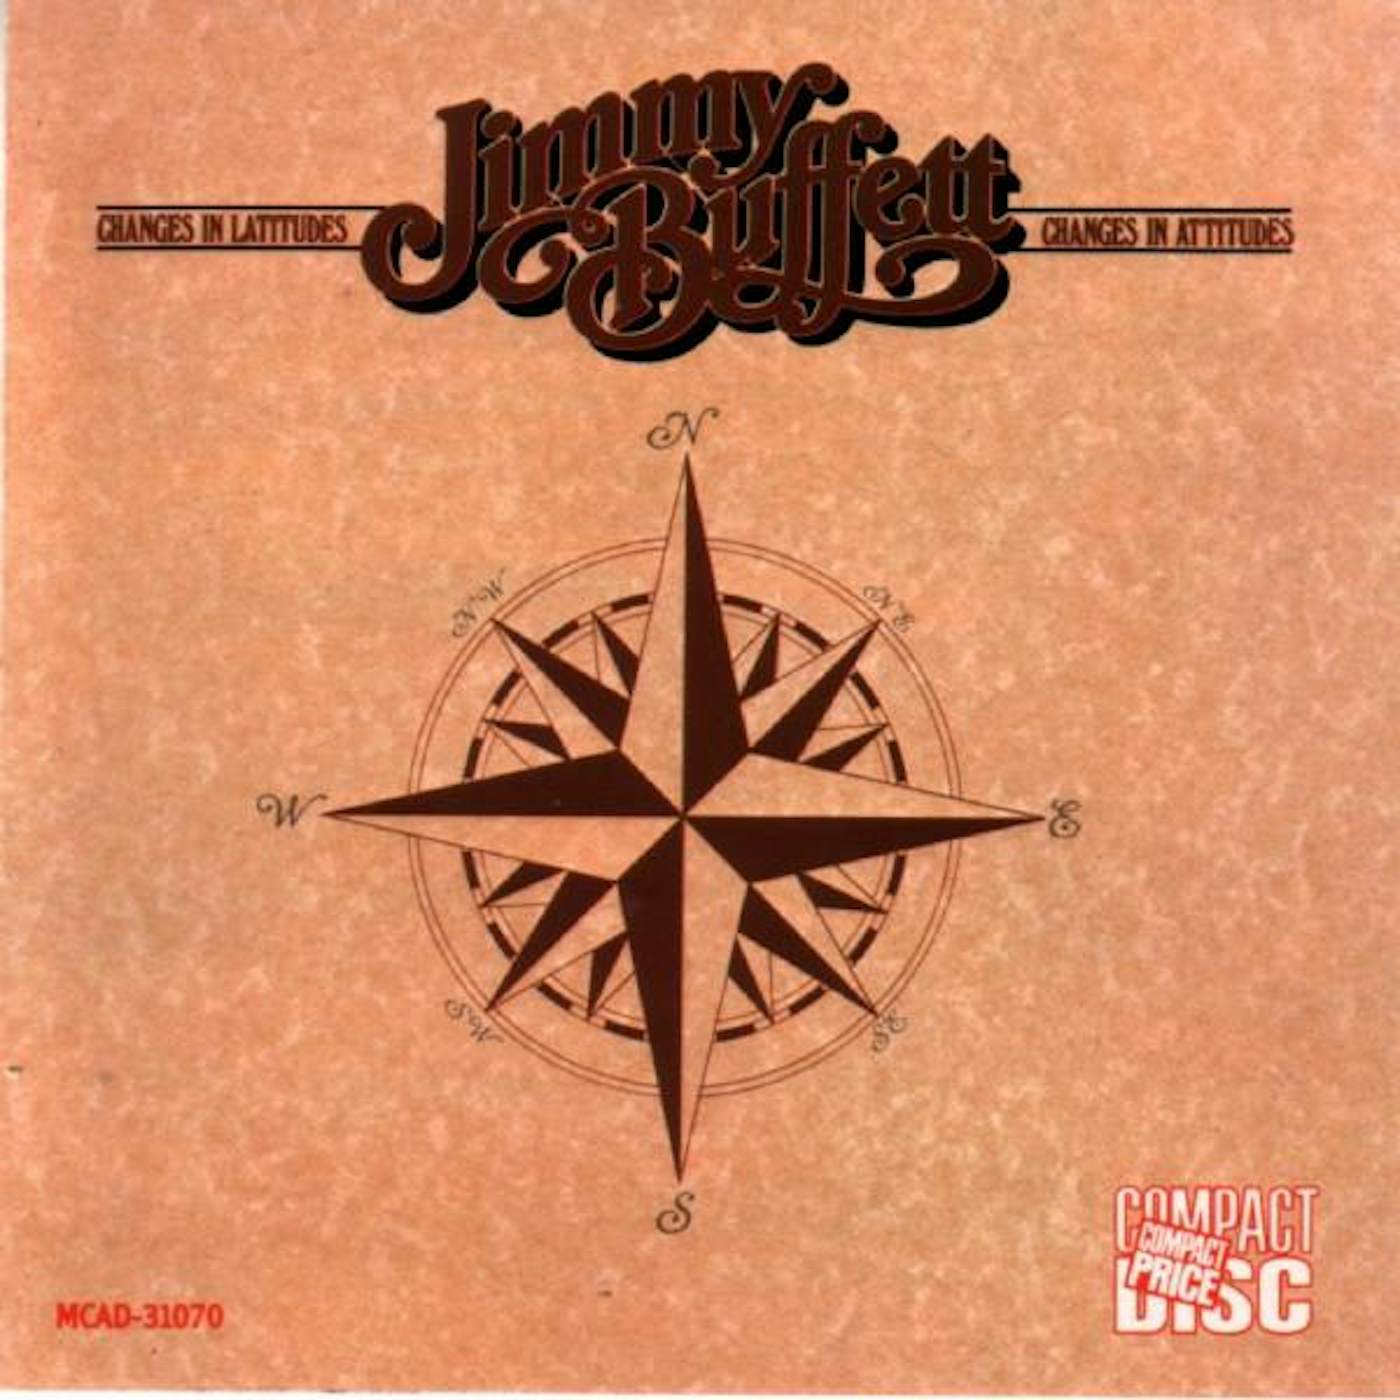 Jimmy Buffett CHANGES IN LATITUDES CHANGES IN ATTITUDES CD